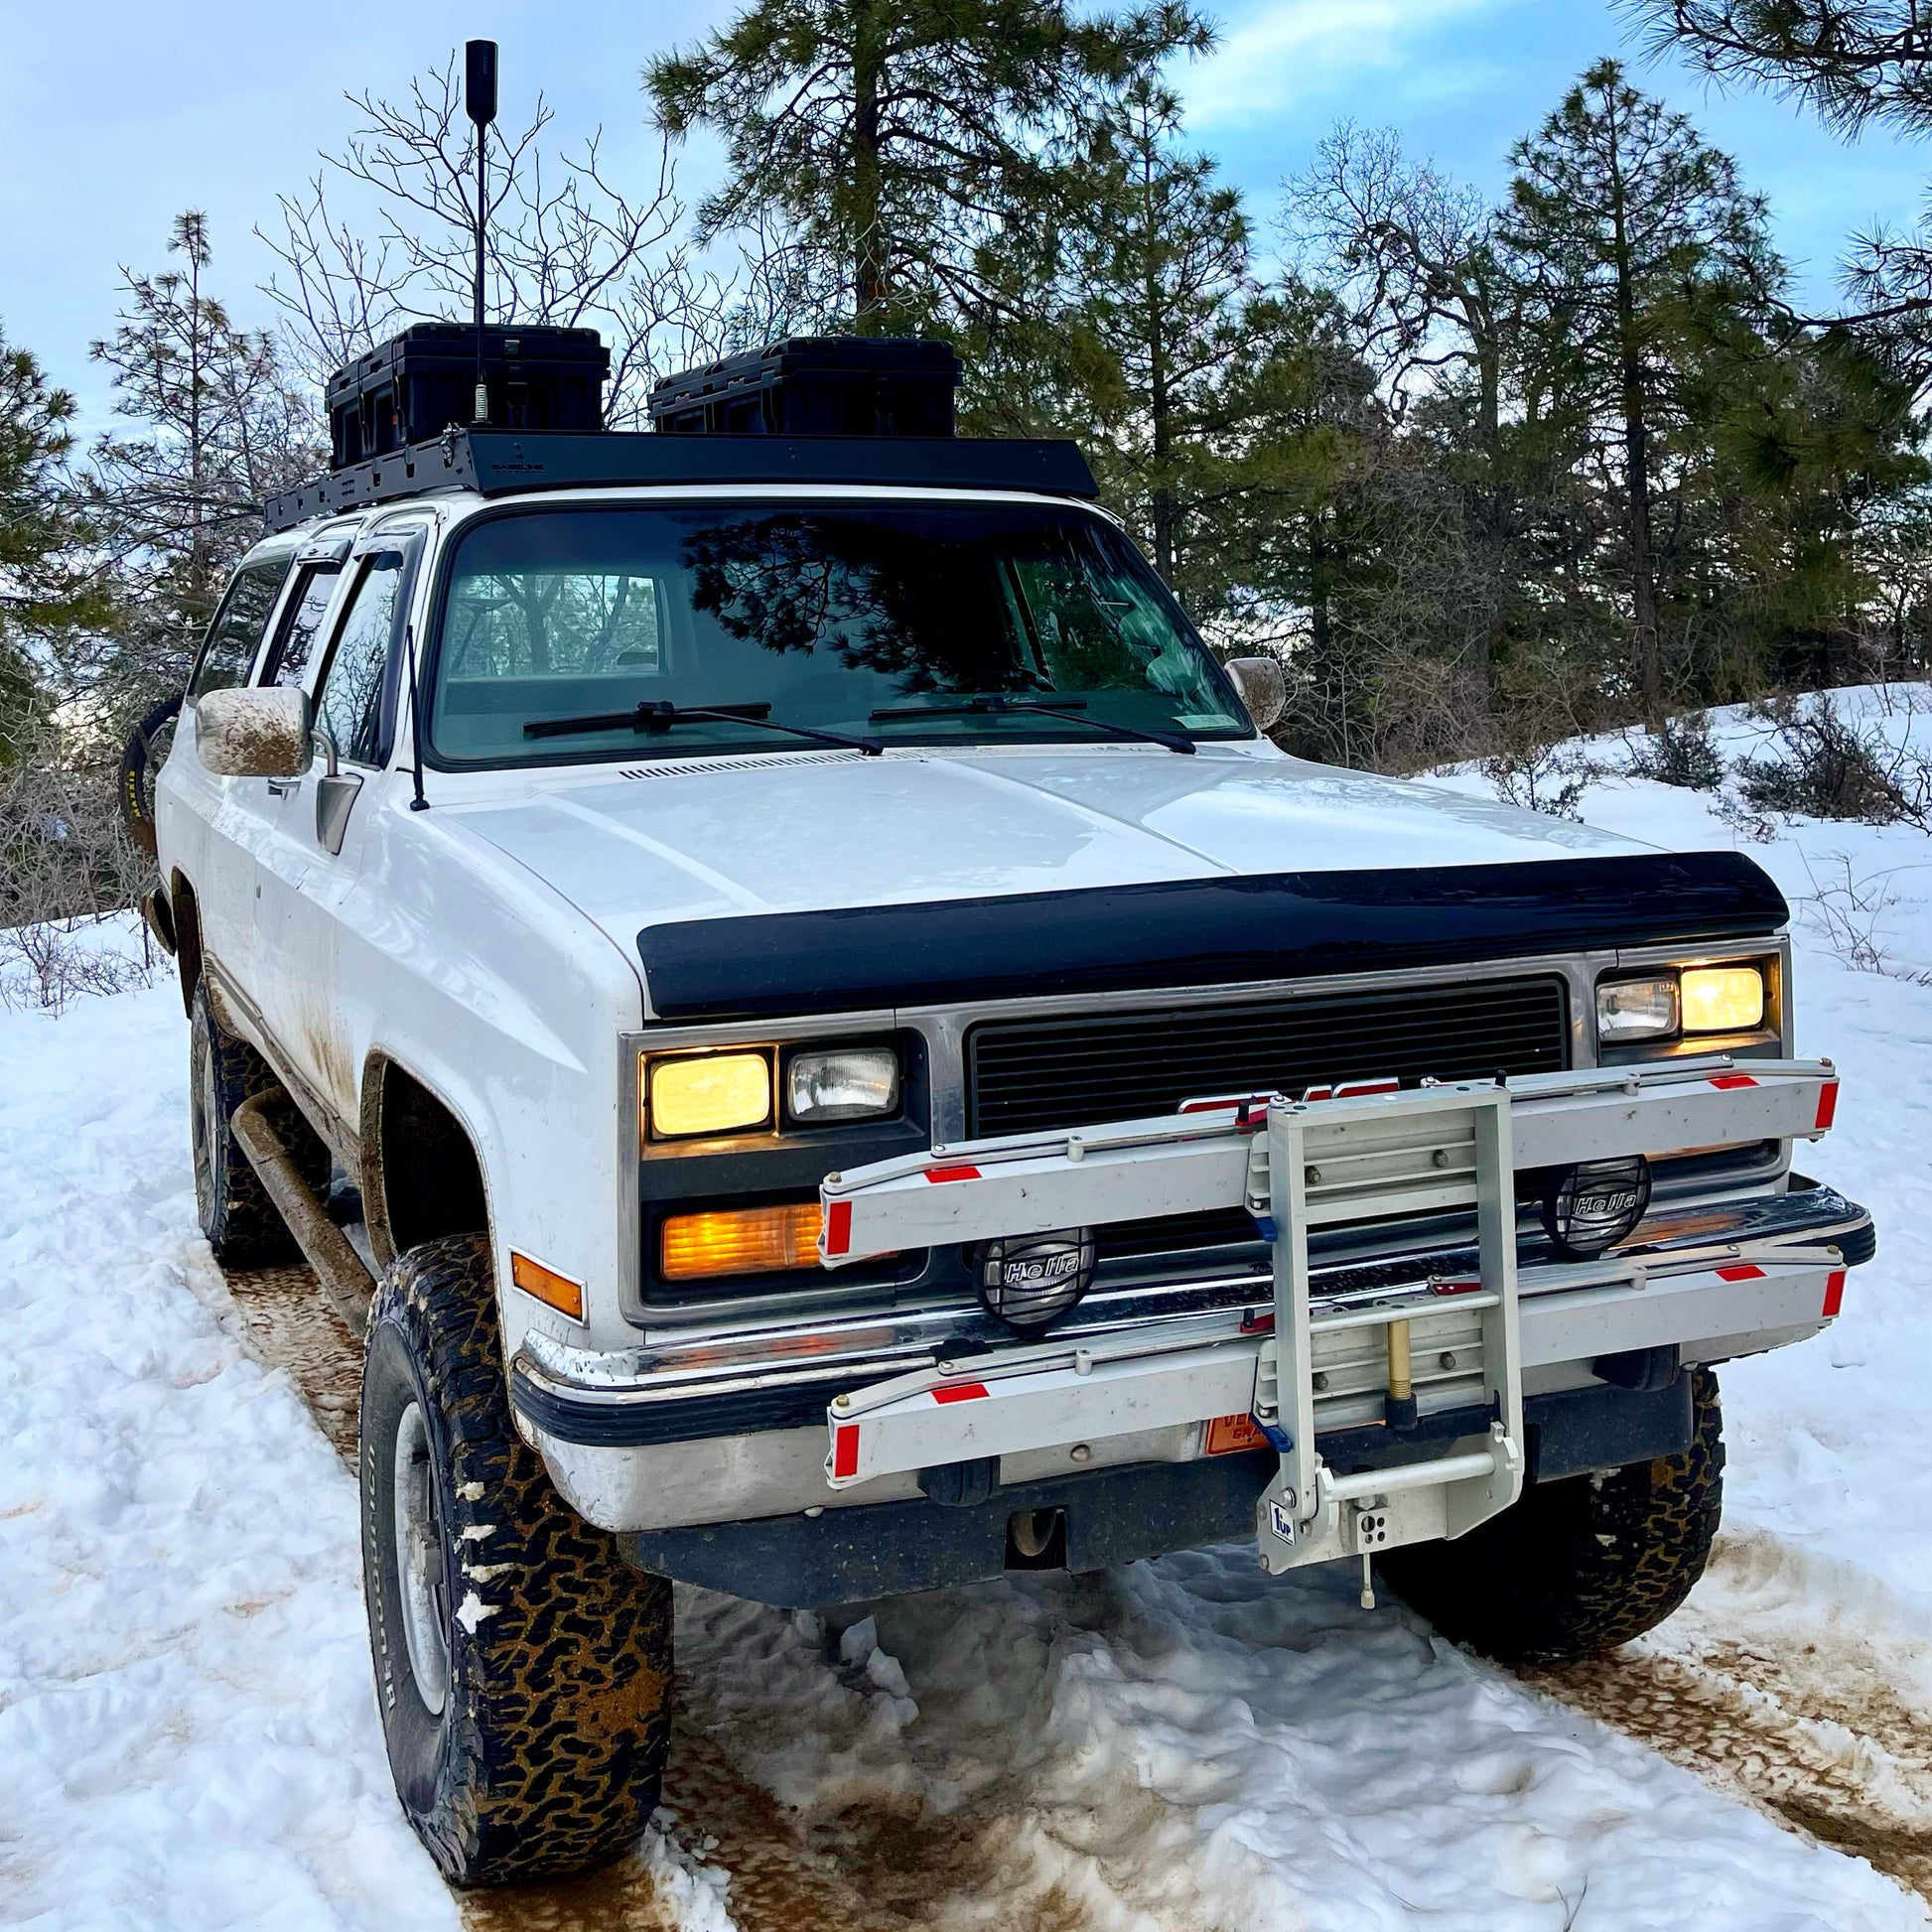 1973-1991 Suburban Roof Rack with front fairing and roam adventure rugged cases.